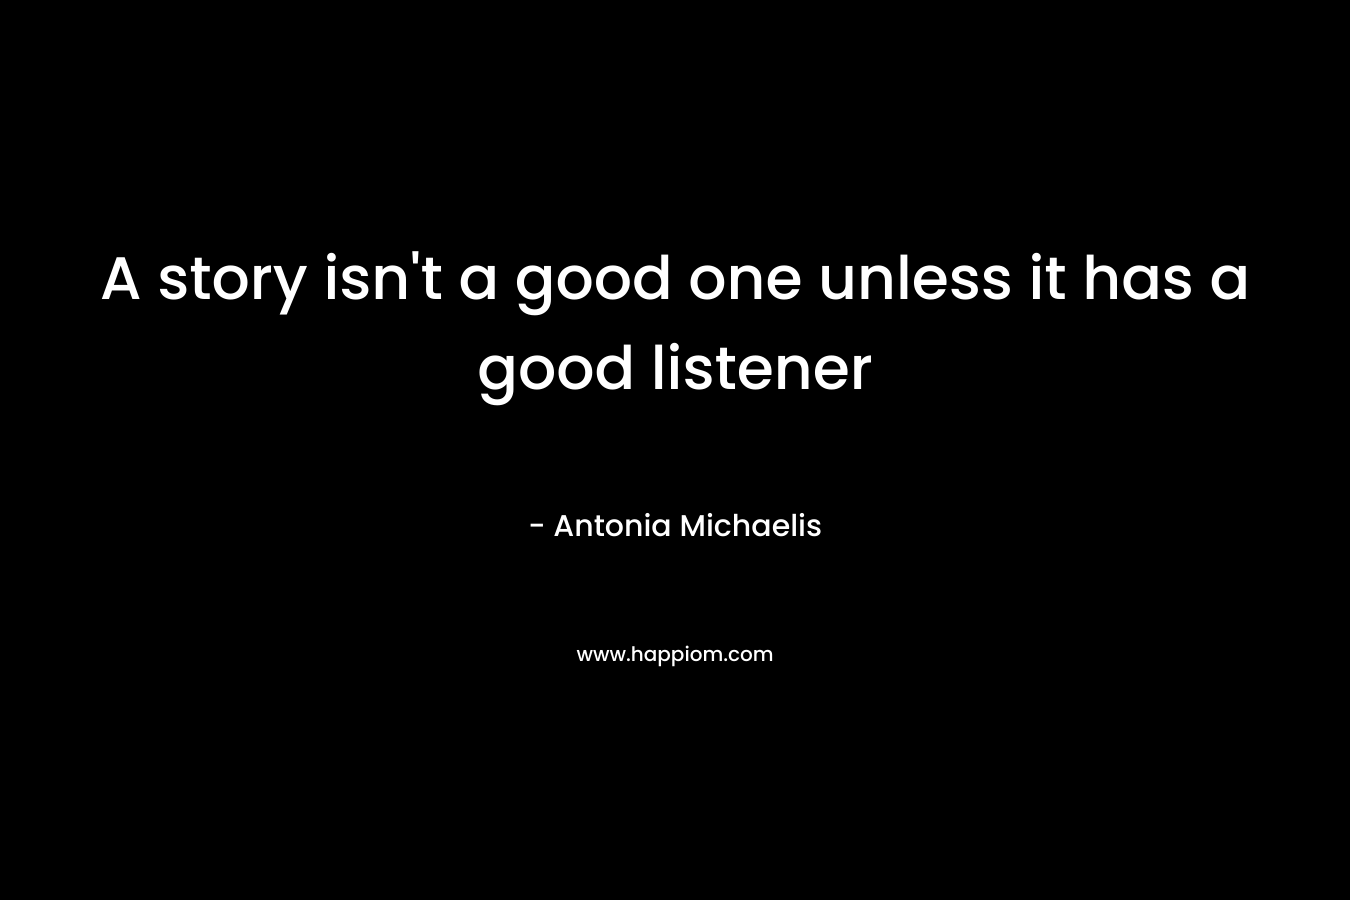 A story isn’t a good one unless it has a good listener – Antonia Michaelis